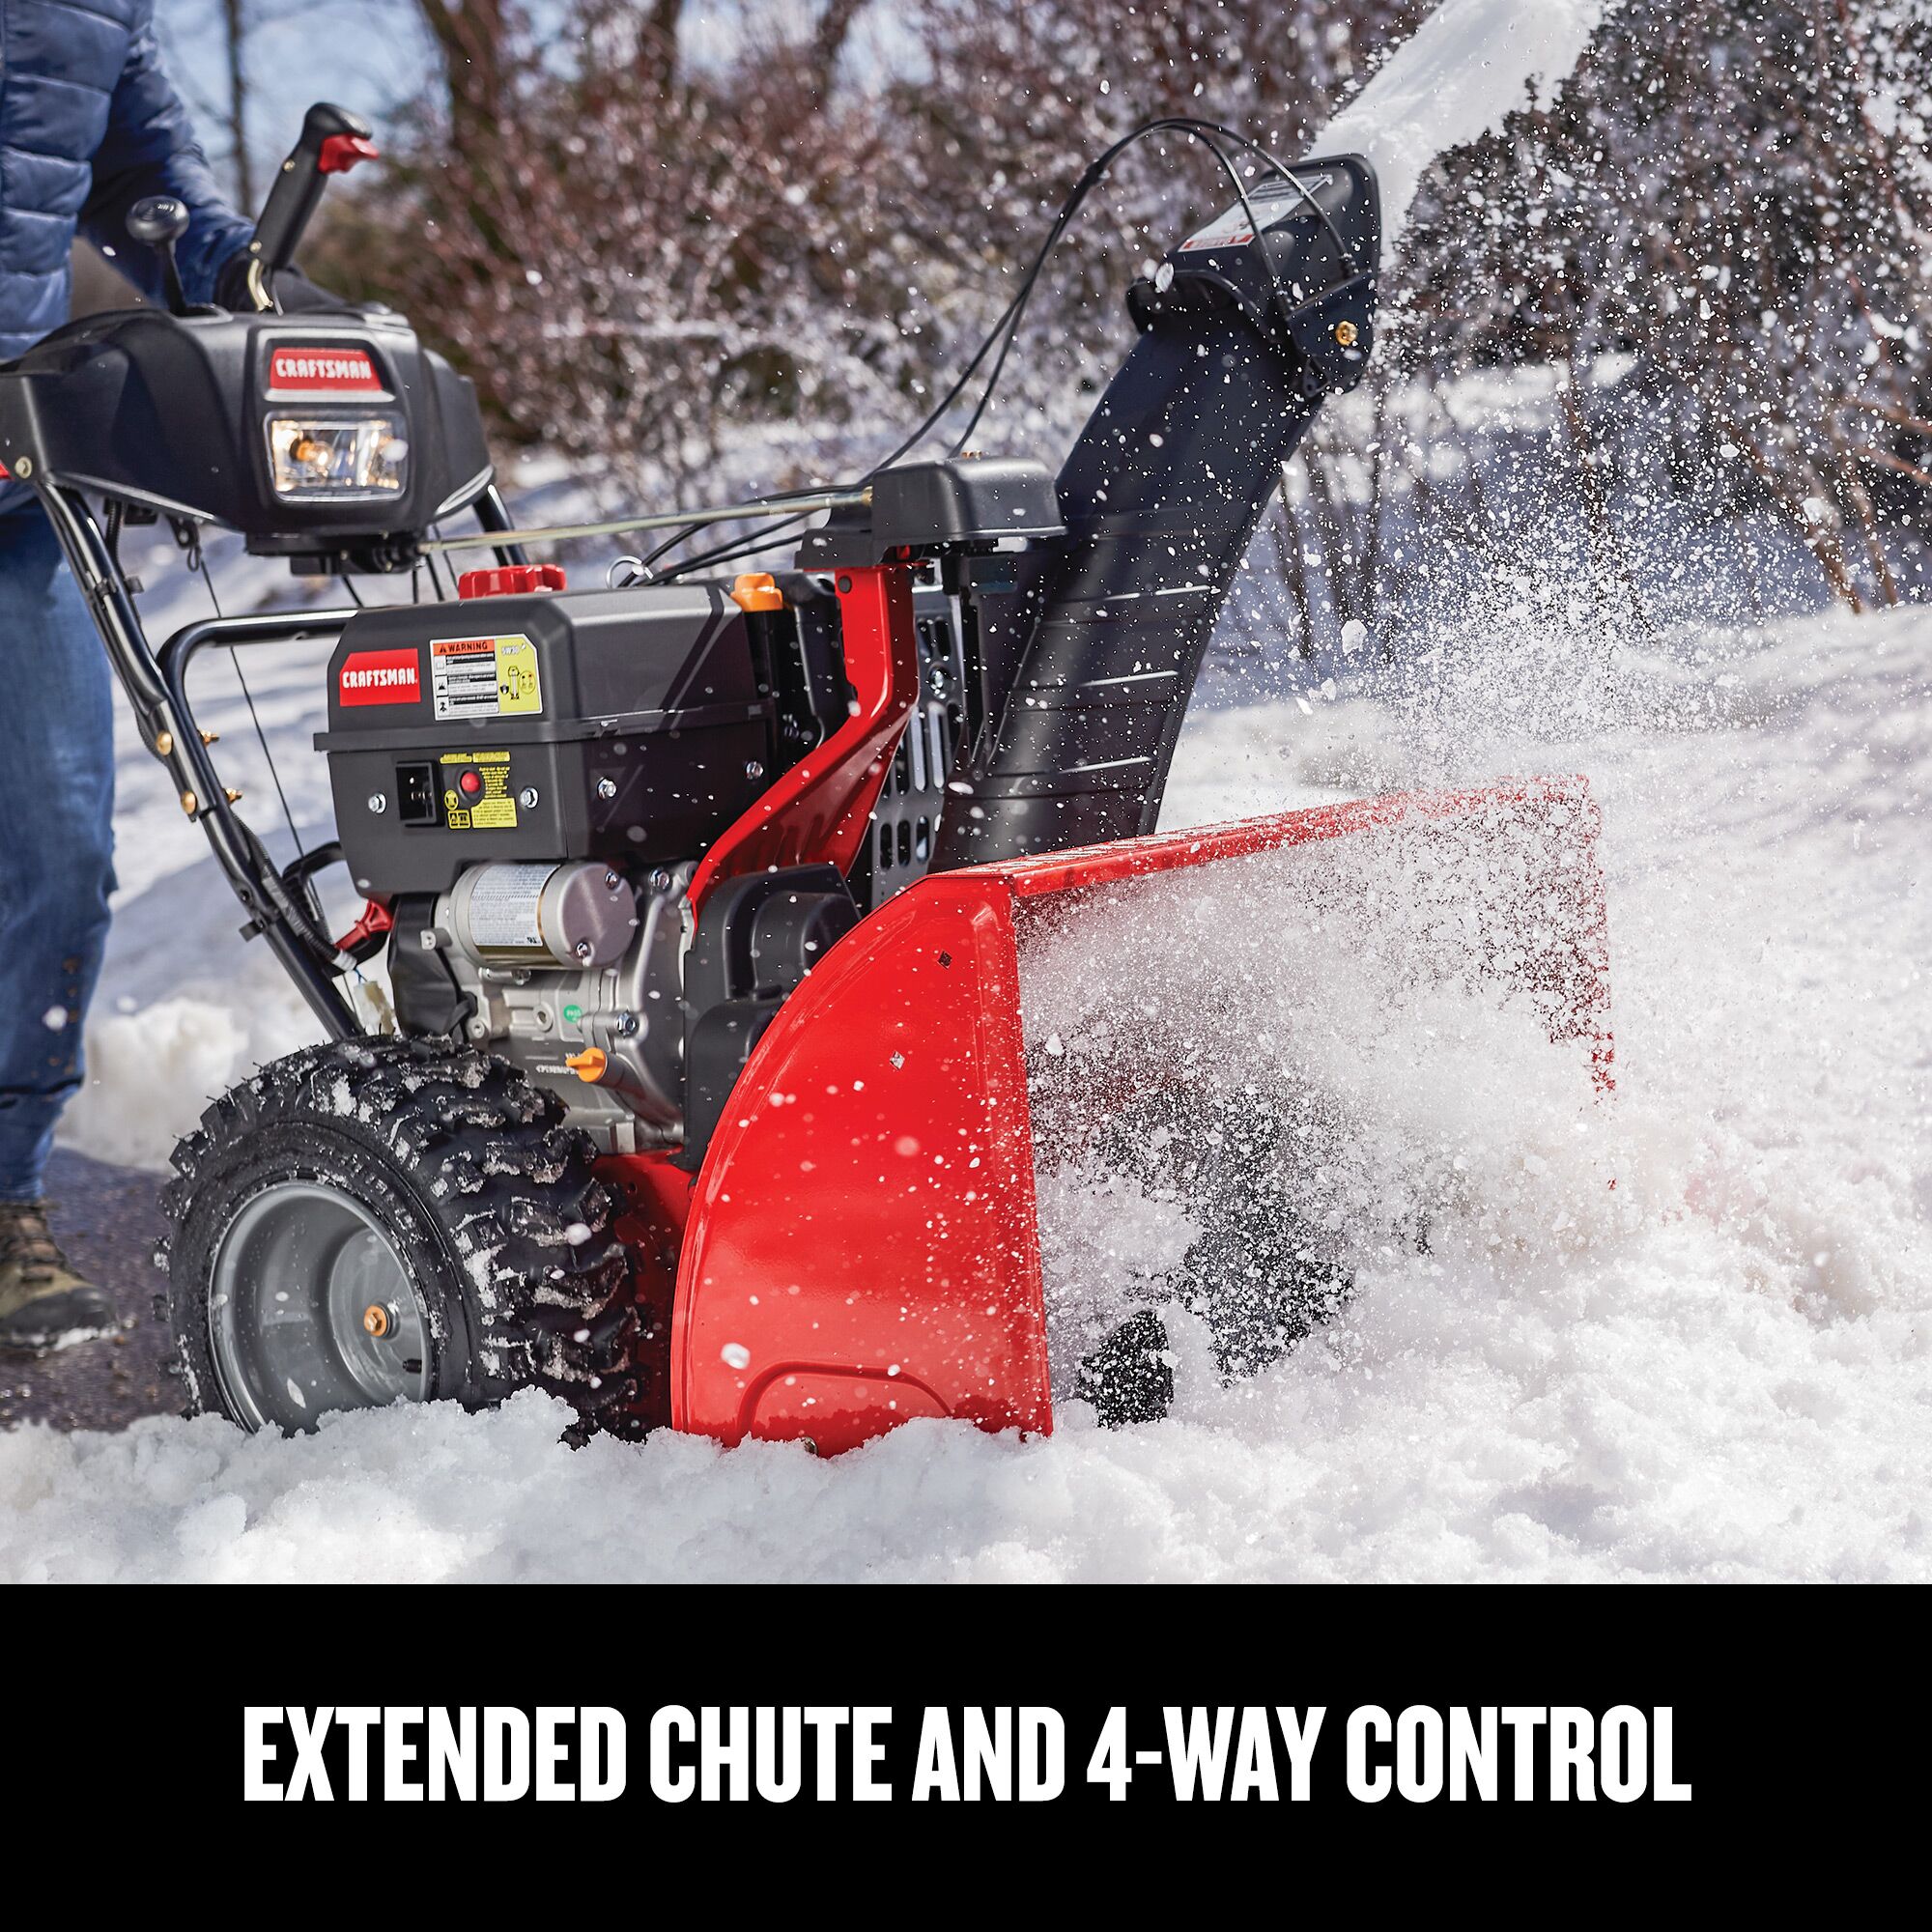 CRAFTSMAN 28-in 357cc Electric Start Three-Stage Snow Blower focused in on extended chute and 4-way control